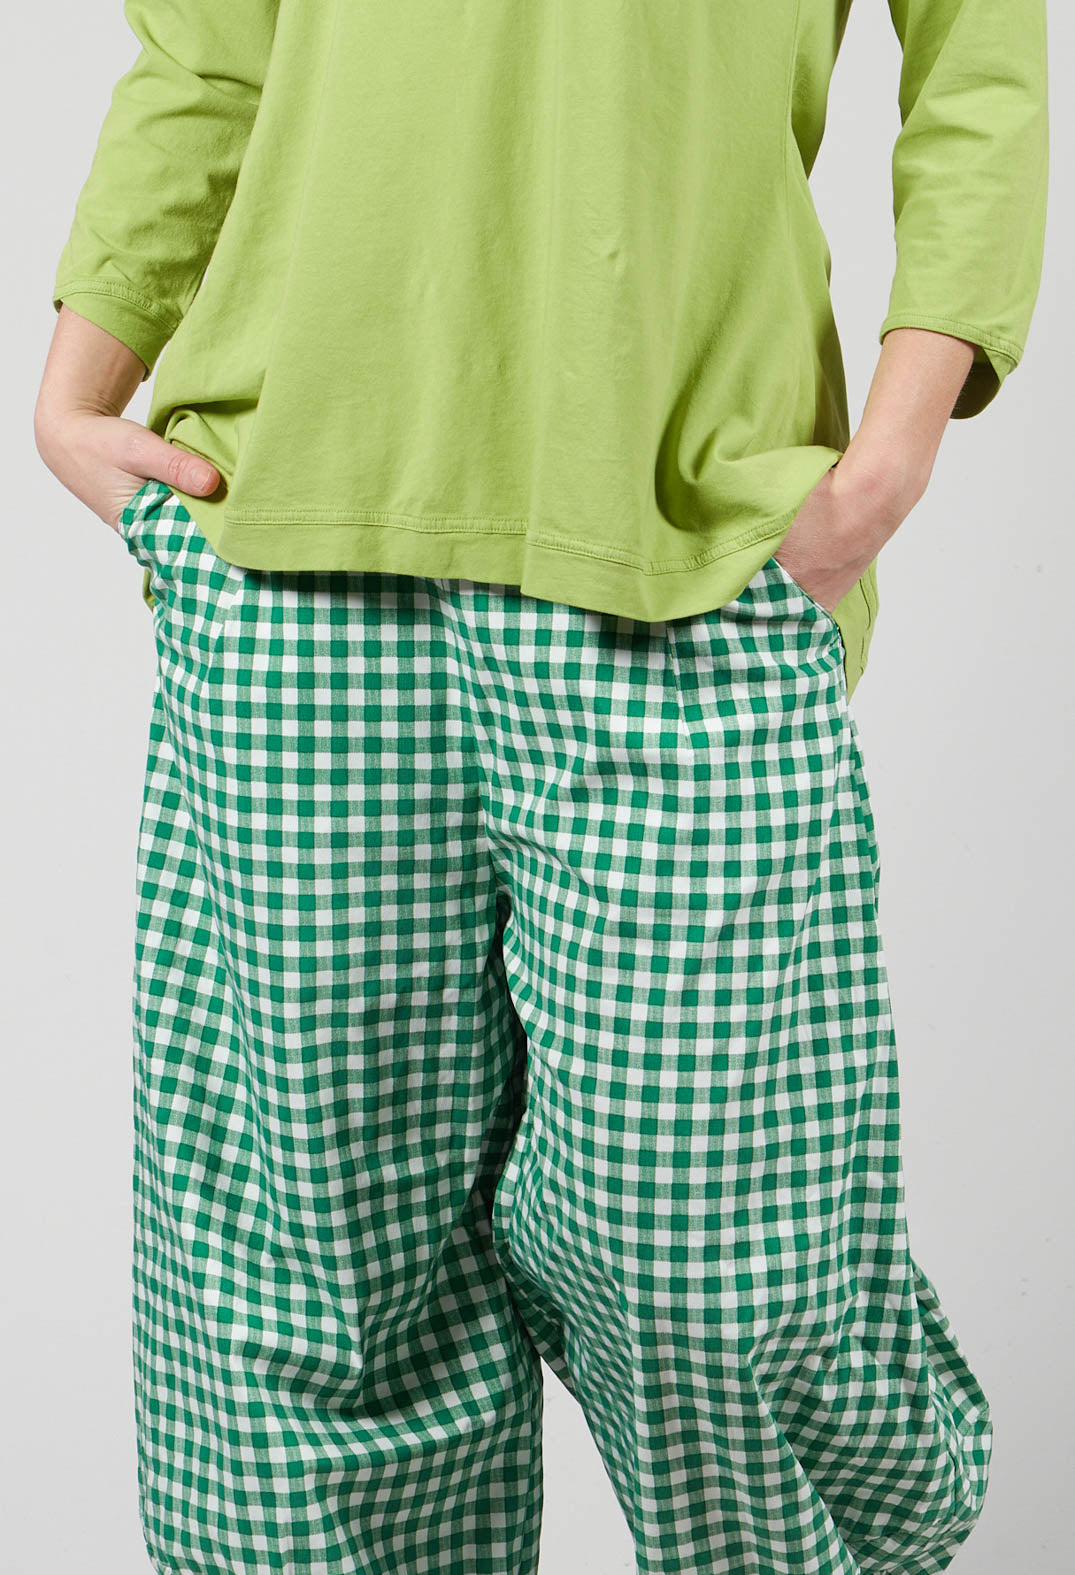 Drop Crotch Trousers with Tulip Shaped Legs in Apple Check